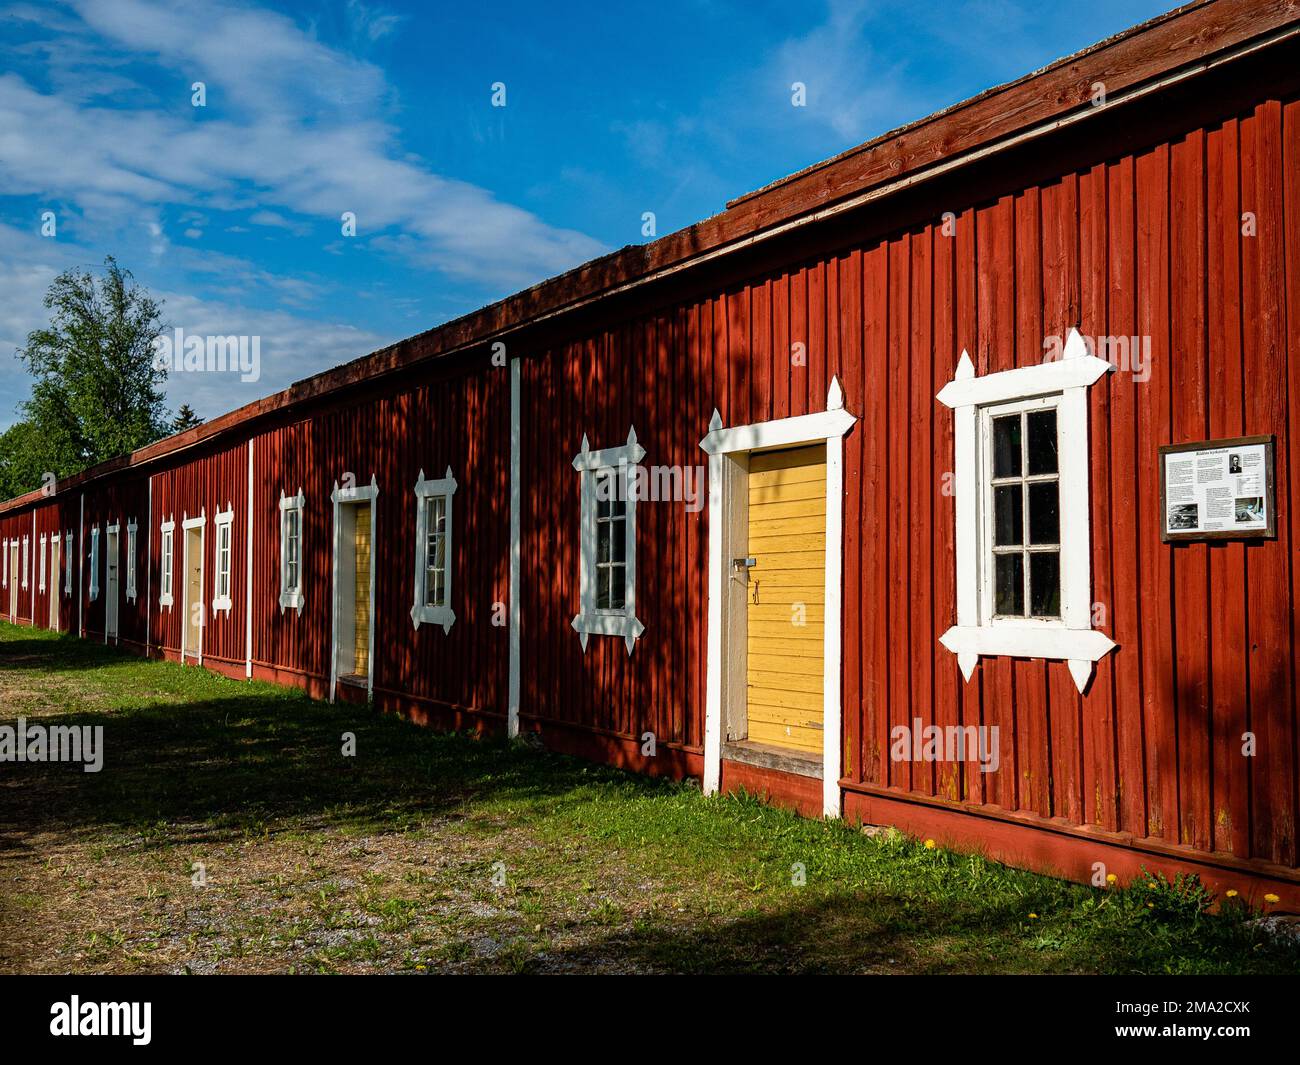 A view traditional Swedish red houses. The color, known as Falu red, has been a symbol of pastoral life in for the last century. Nordic countries all boast